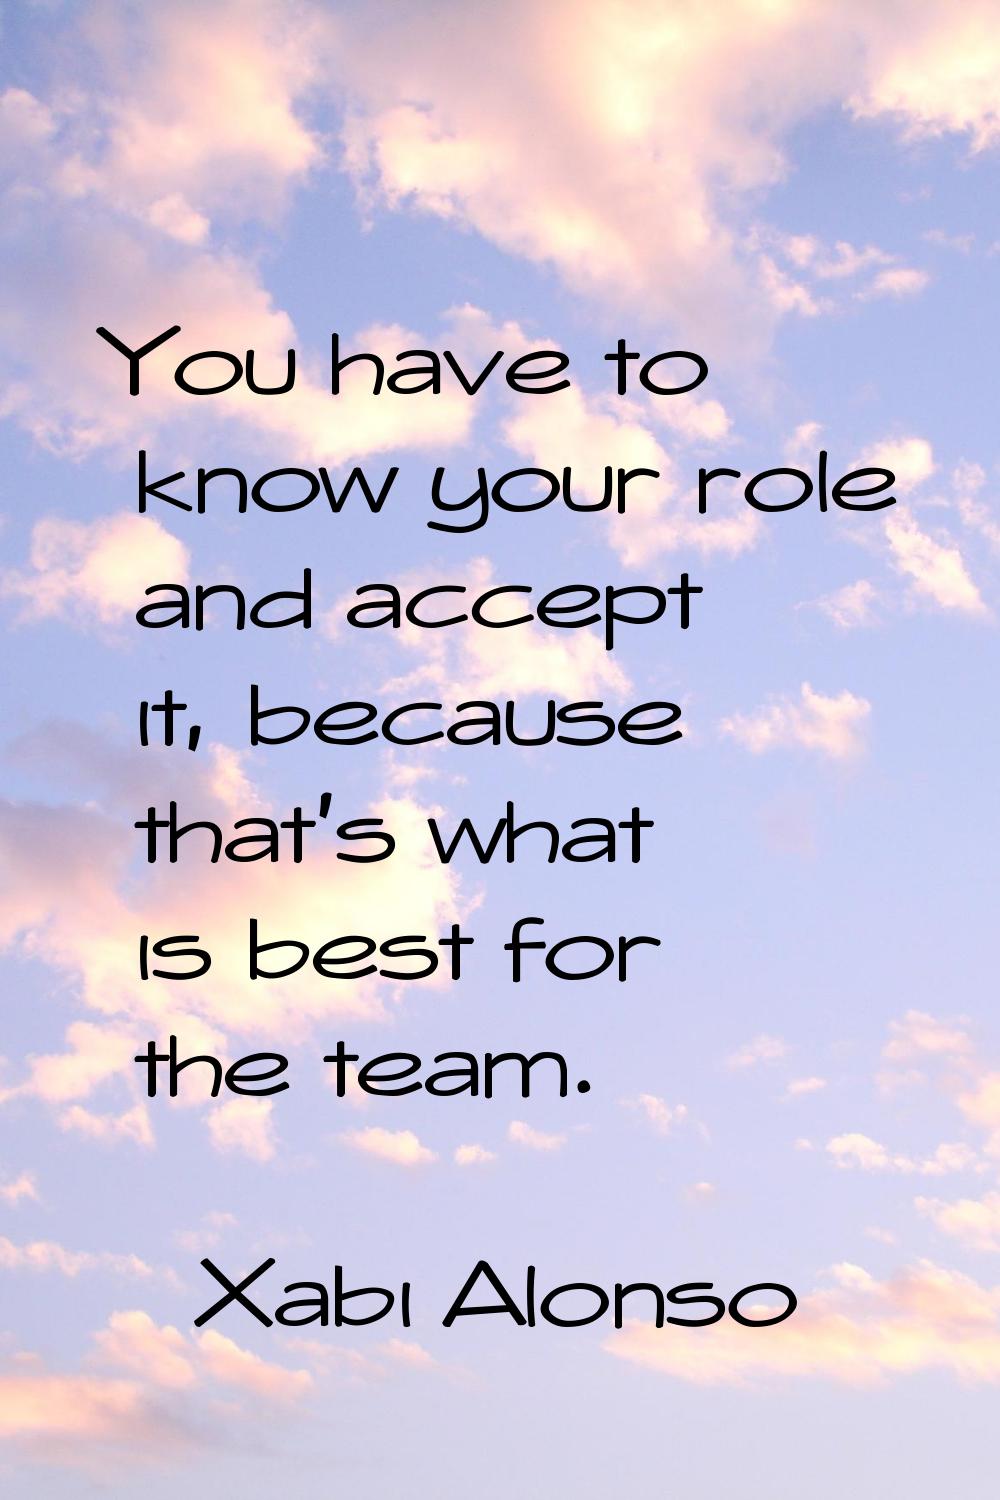 You have to know your role and accept it, because that's what is best for the team.